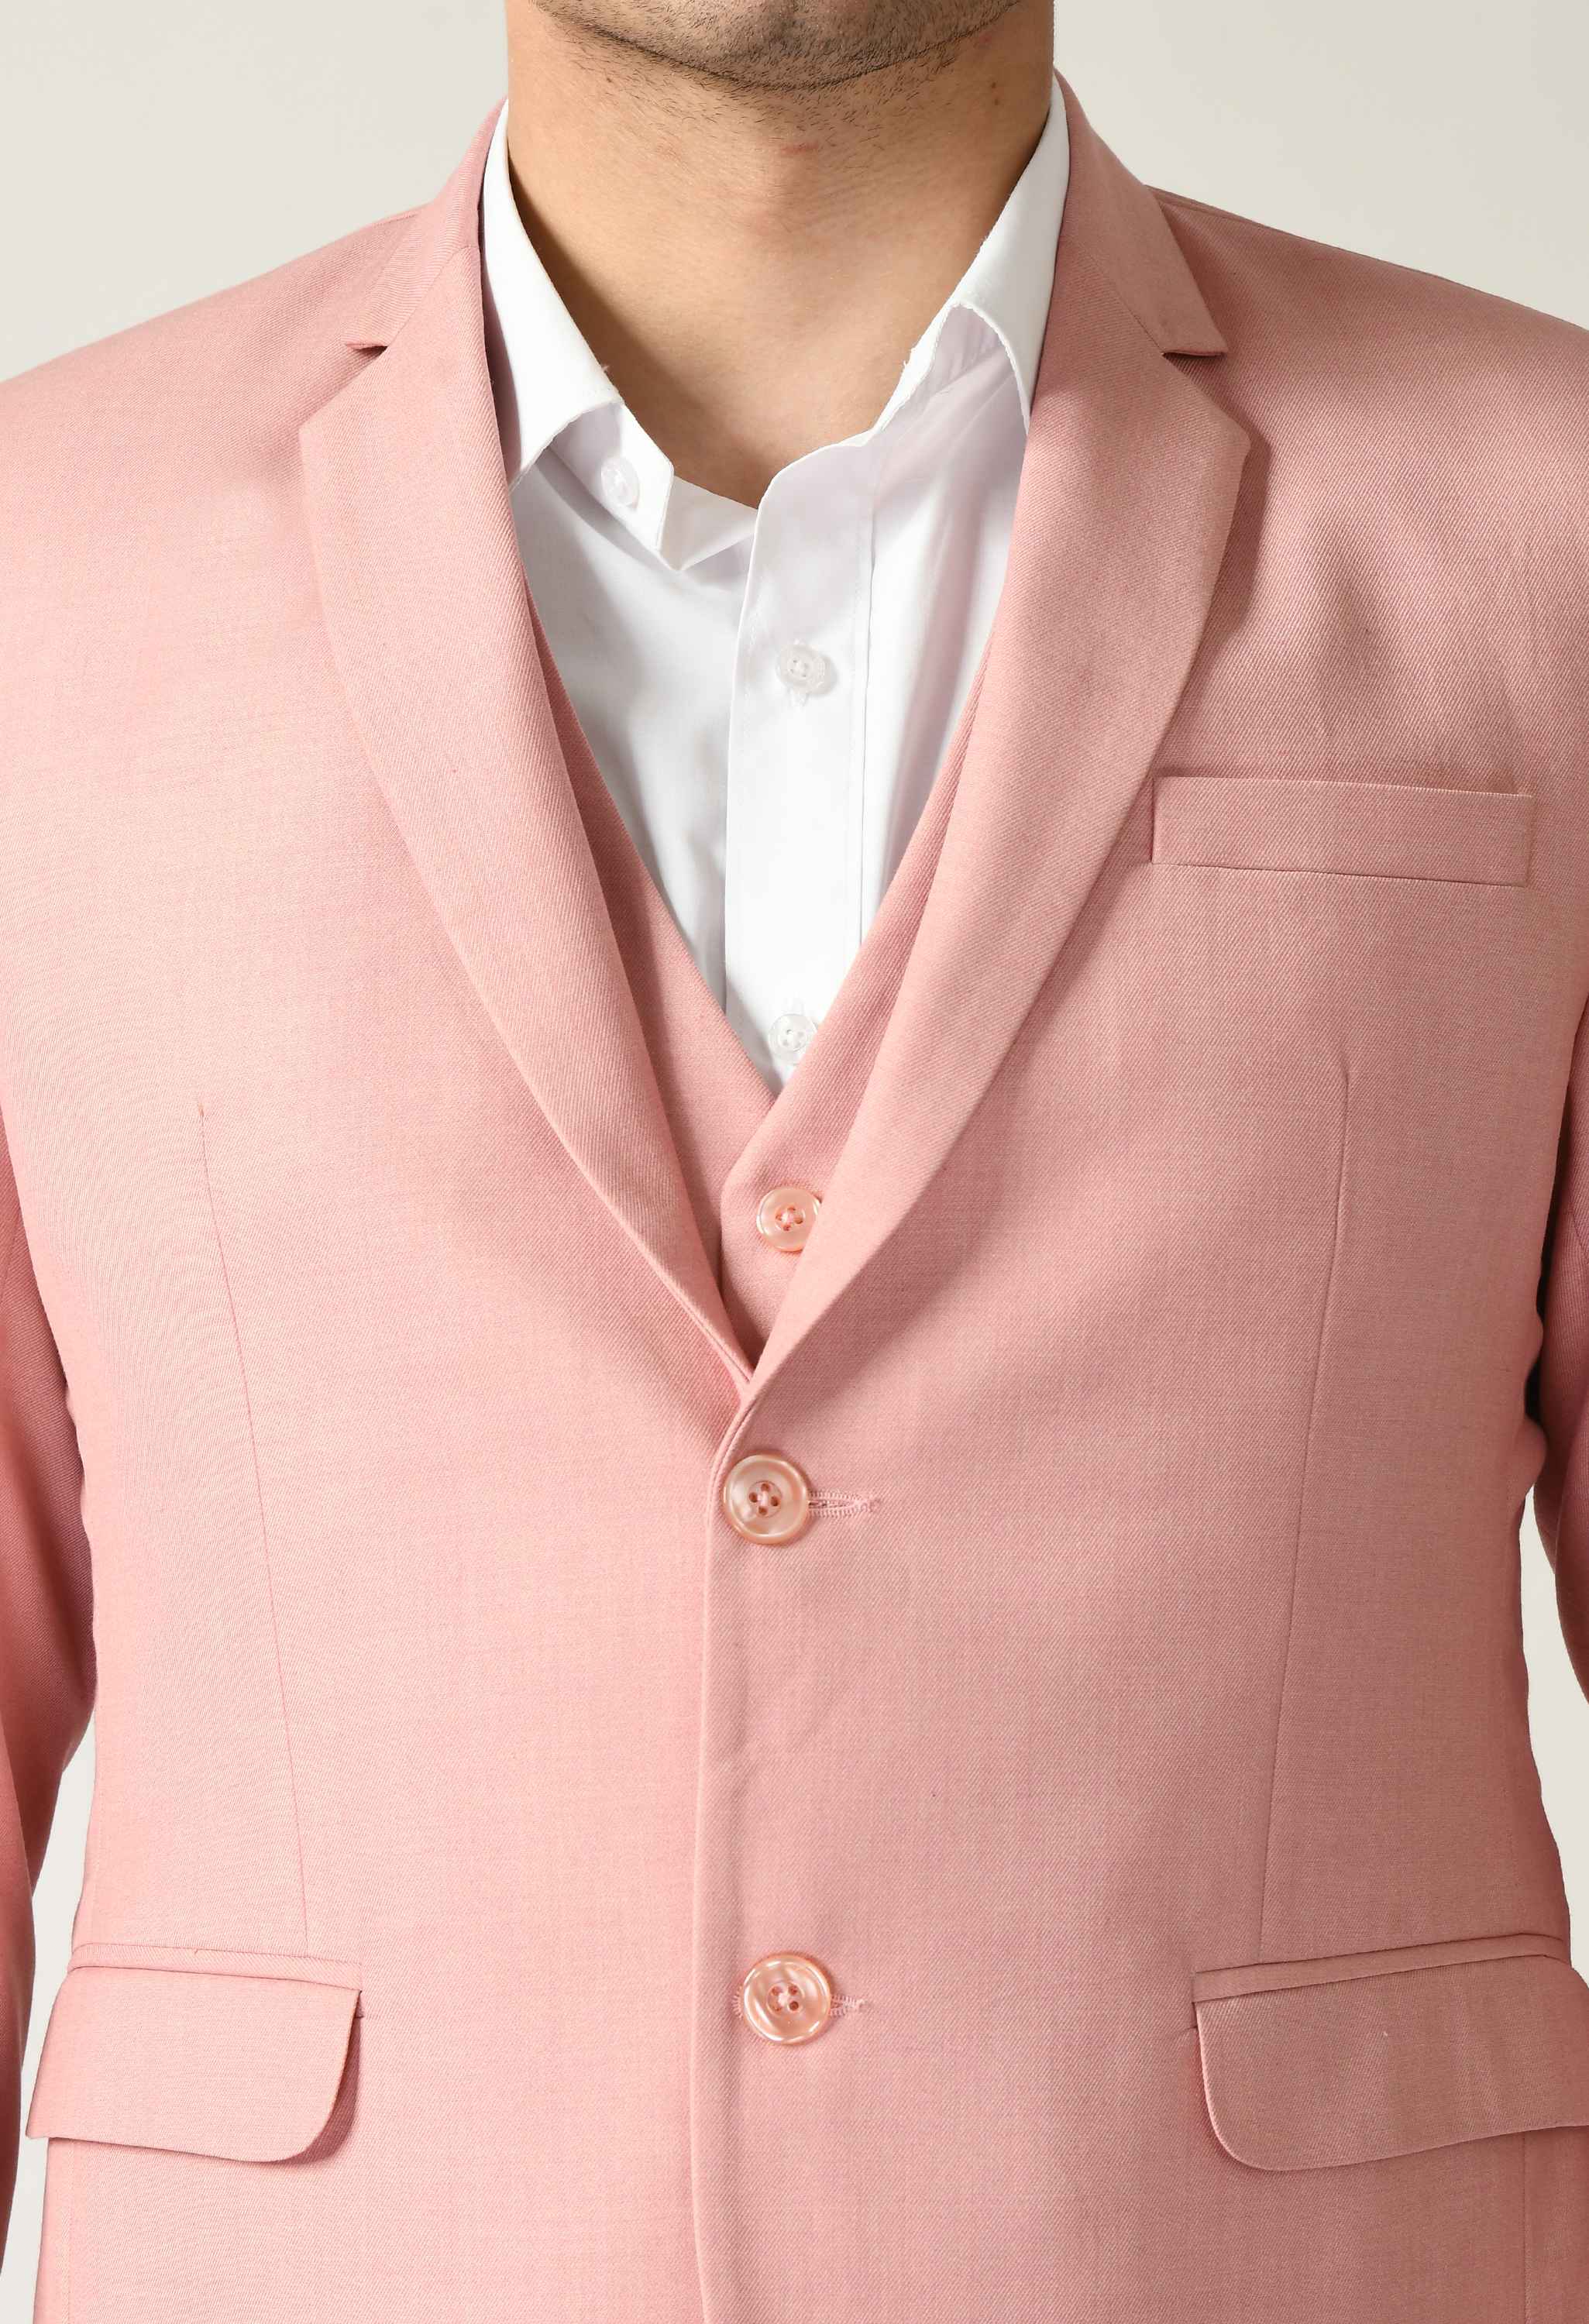 Knitted Pink Party Wear Suit Set